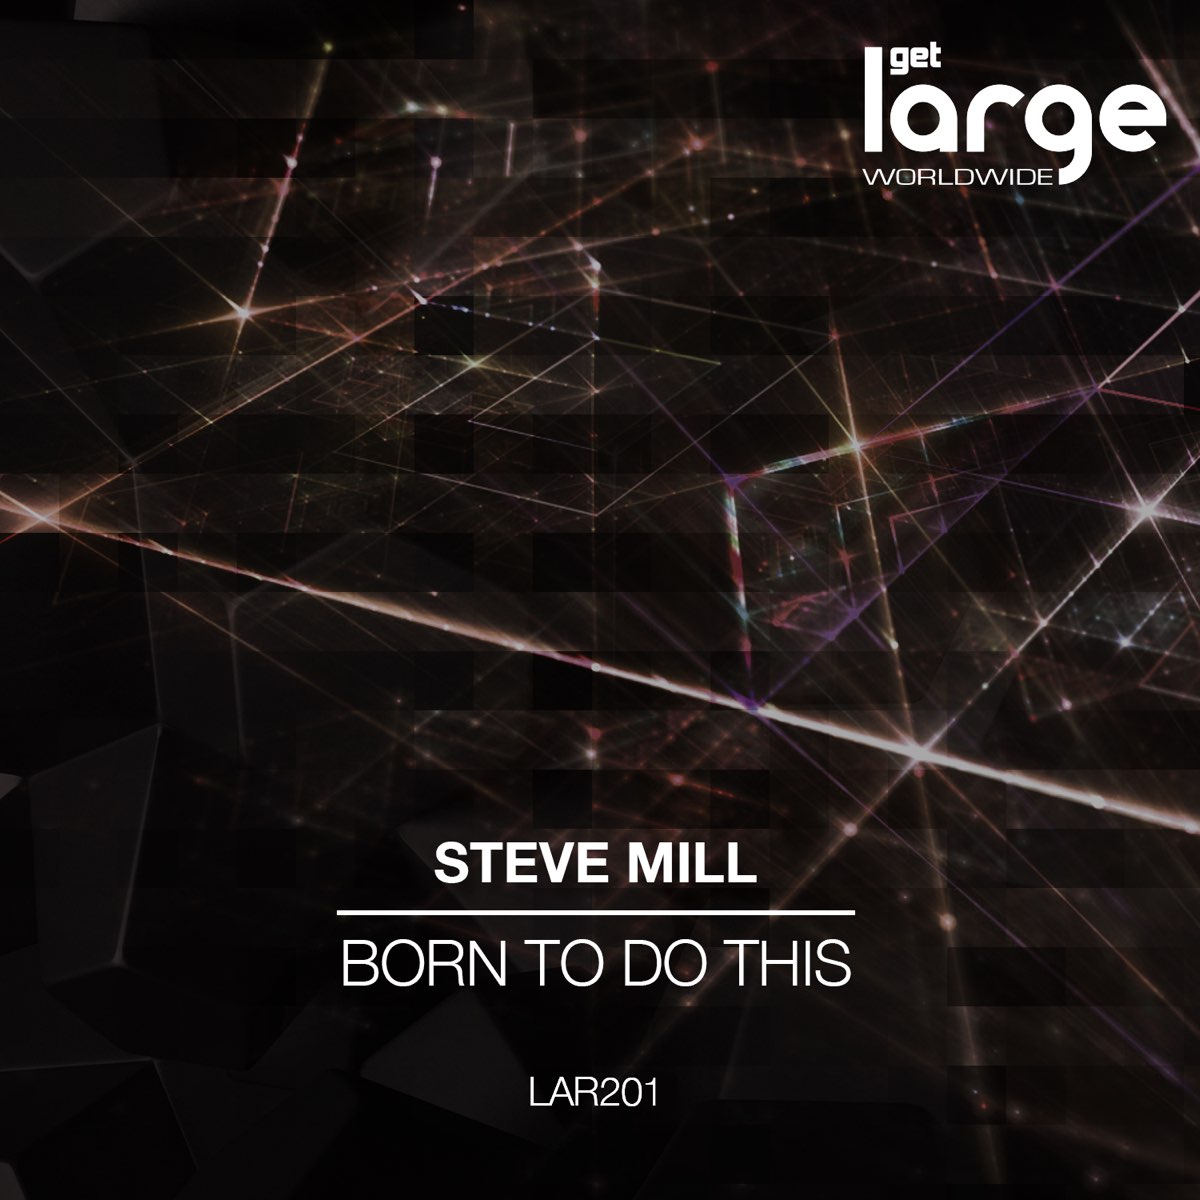 Born to be number one. Born to Mill. Steve Mill - next to you. Born in Mill.